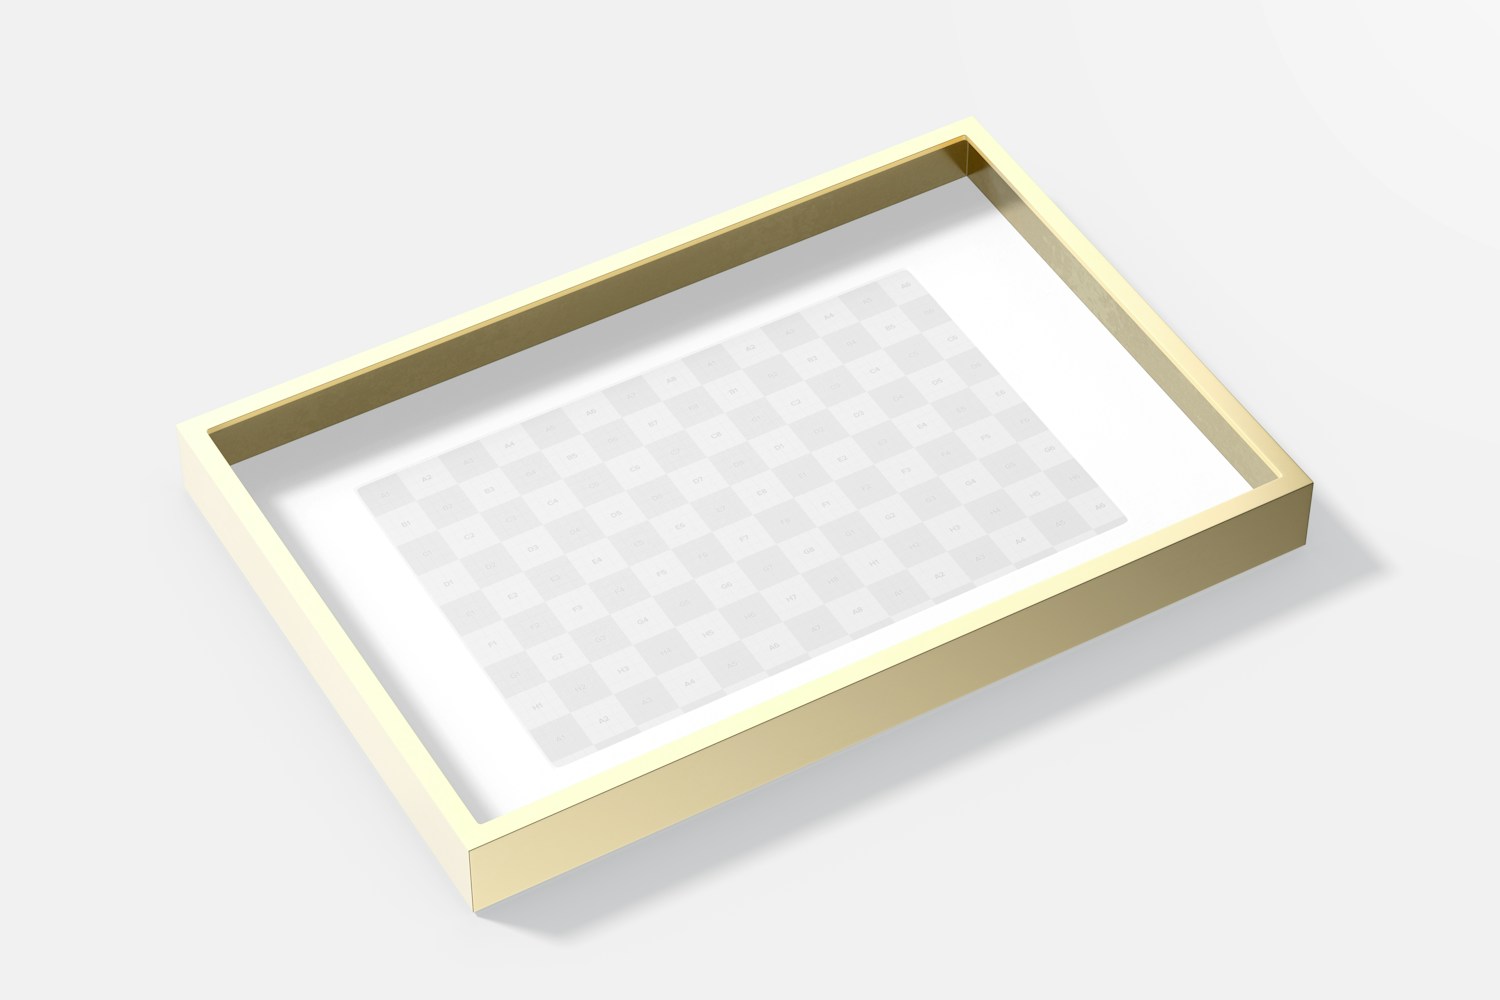 Metallic Large Shadow Gallery Box Frame Mockup, Perspective View